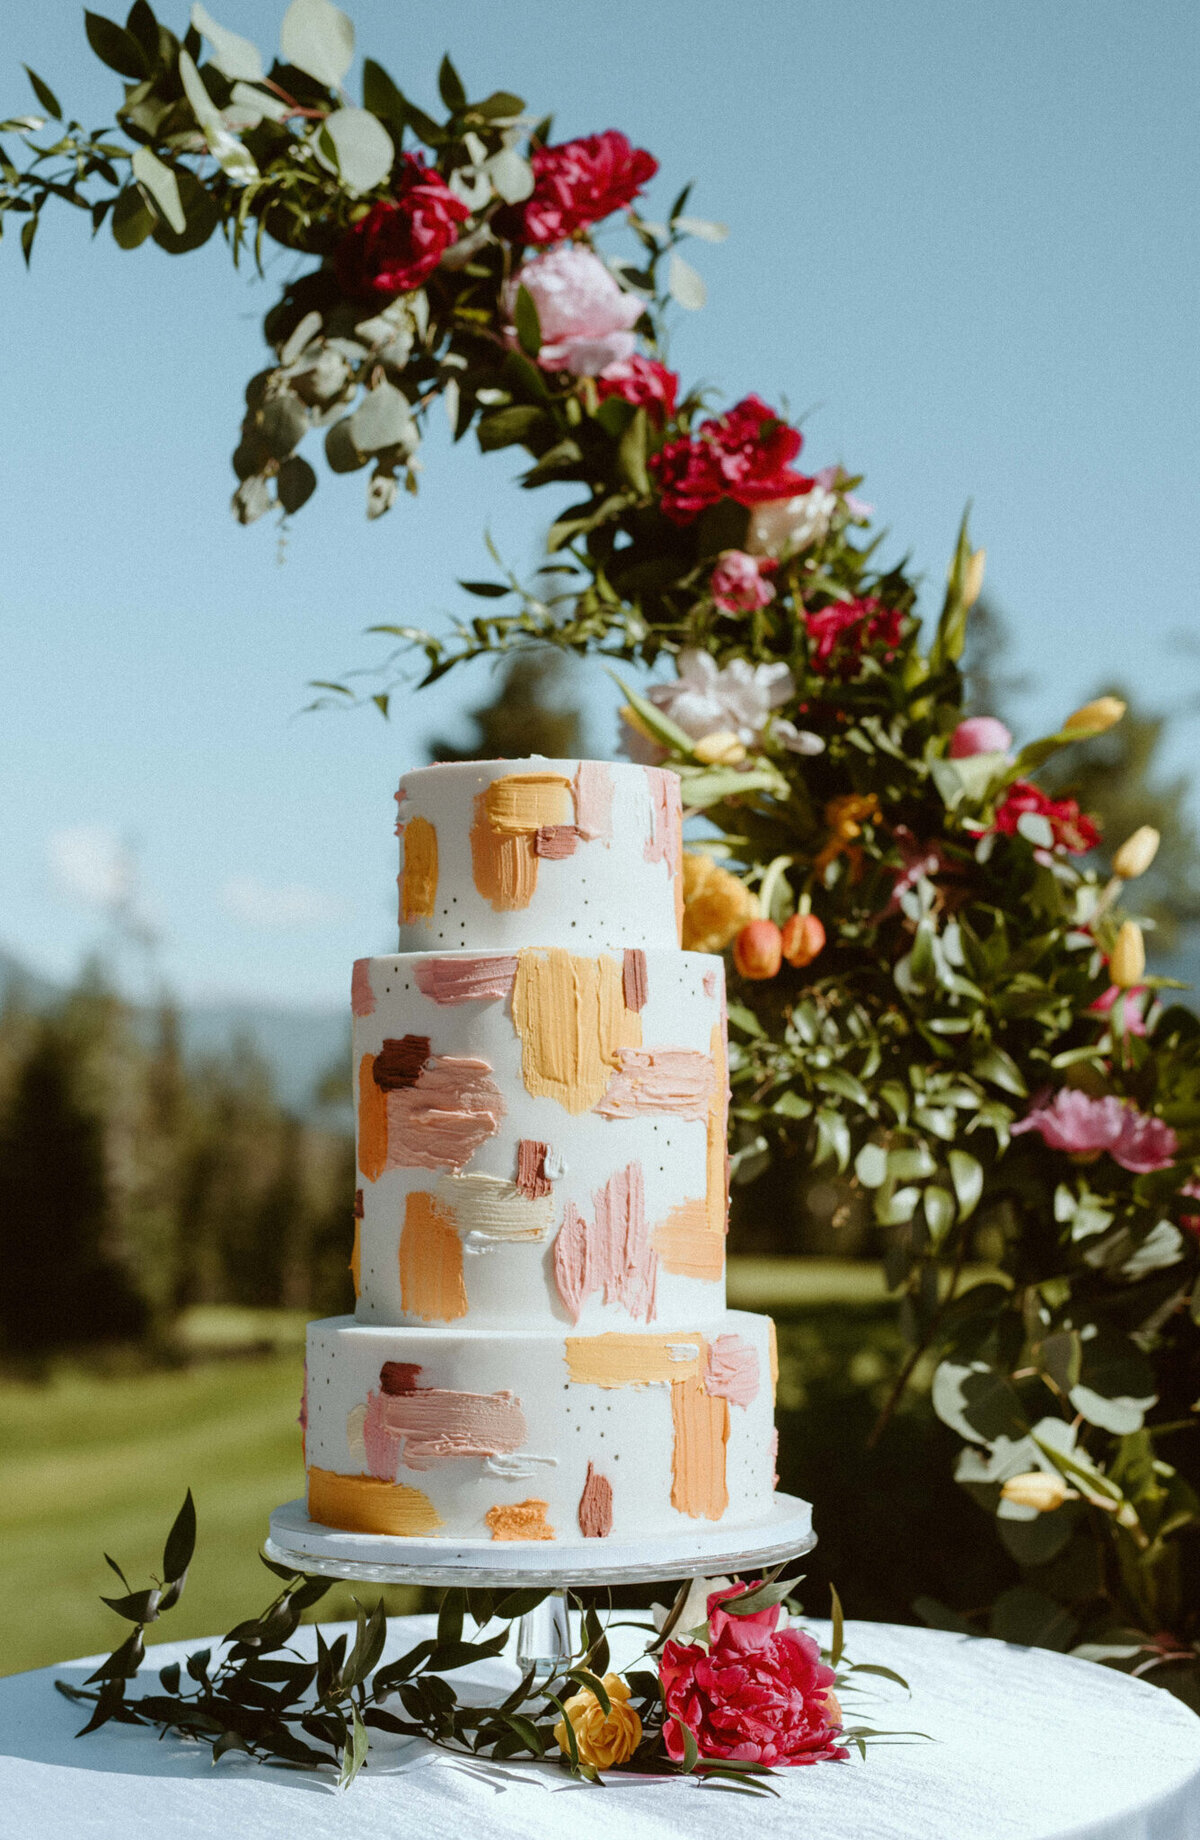 Trendy and unique three-tiered wedding cake with pink and orange buttercream painted details, by Yvonne's Delightful Cakes, classic cakes & desserts in Calgary, Alberta, featured on the Brontë Bride Vendor Guide.